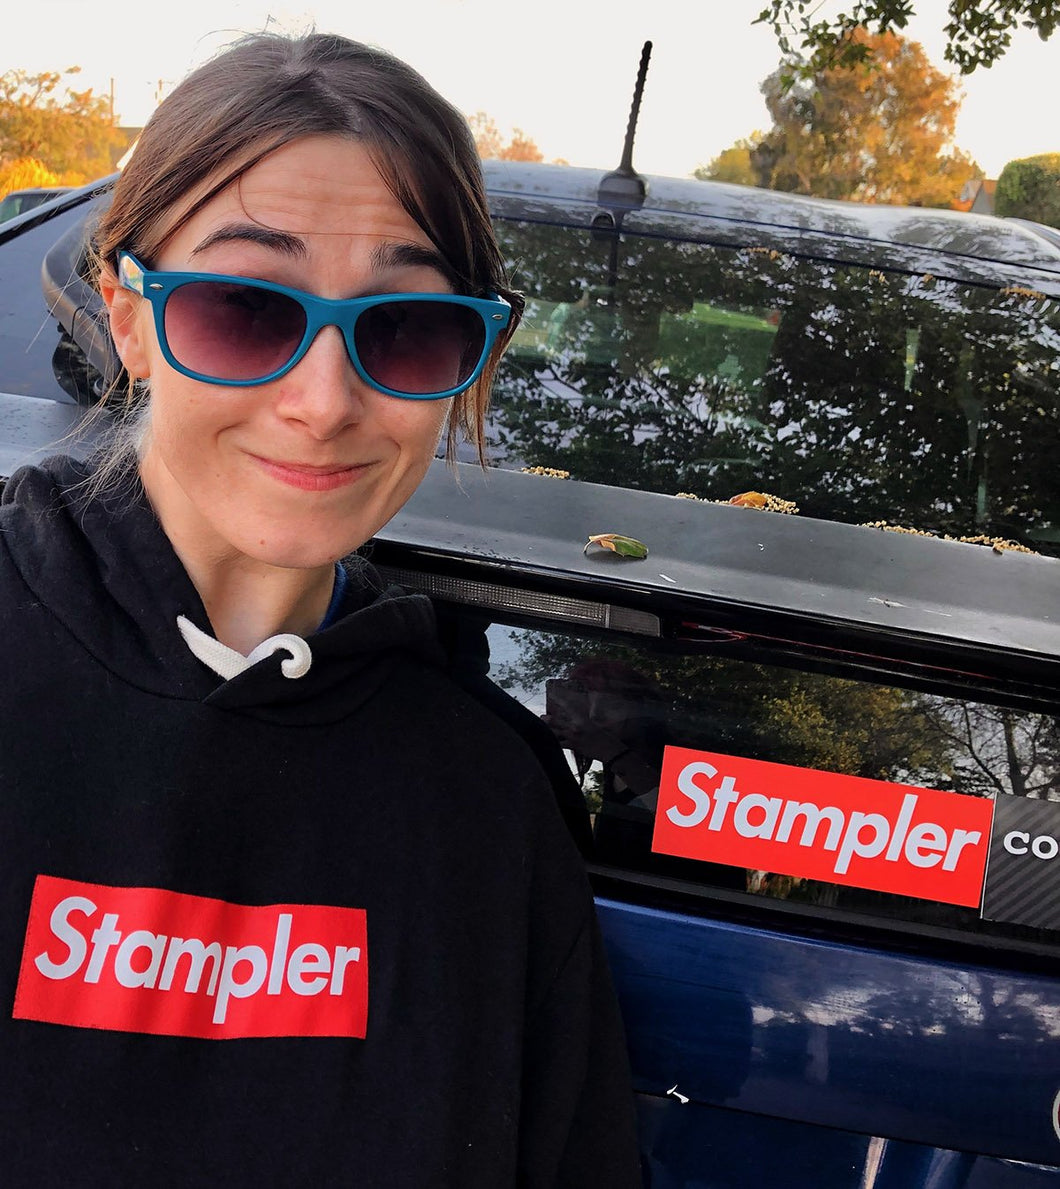 Beth May, Woman with. blue sunglasses, in the Stampreme hoodie in front of a car with the Stampreme bumper sticker.